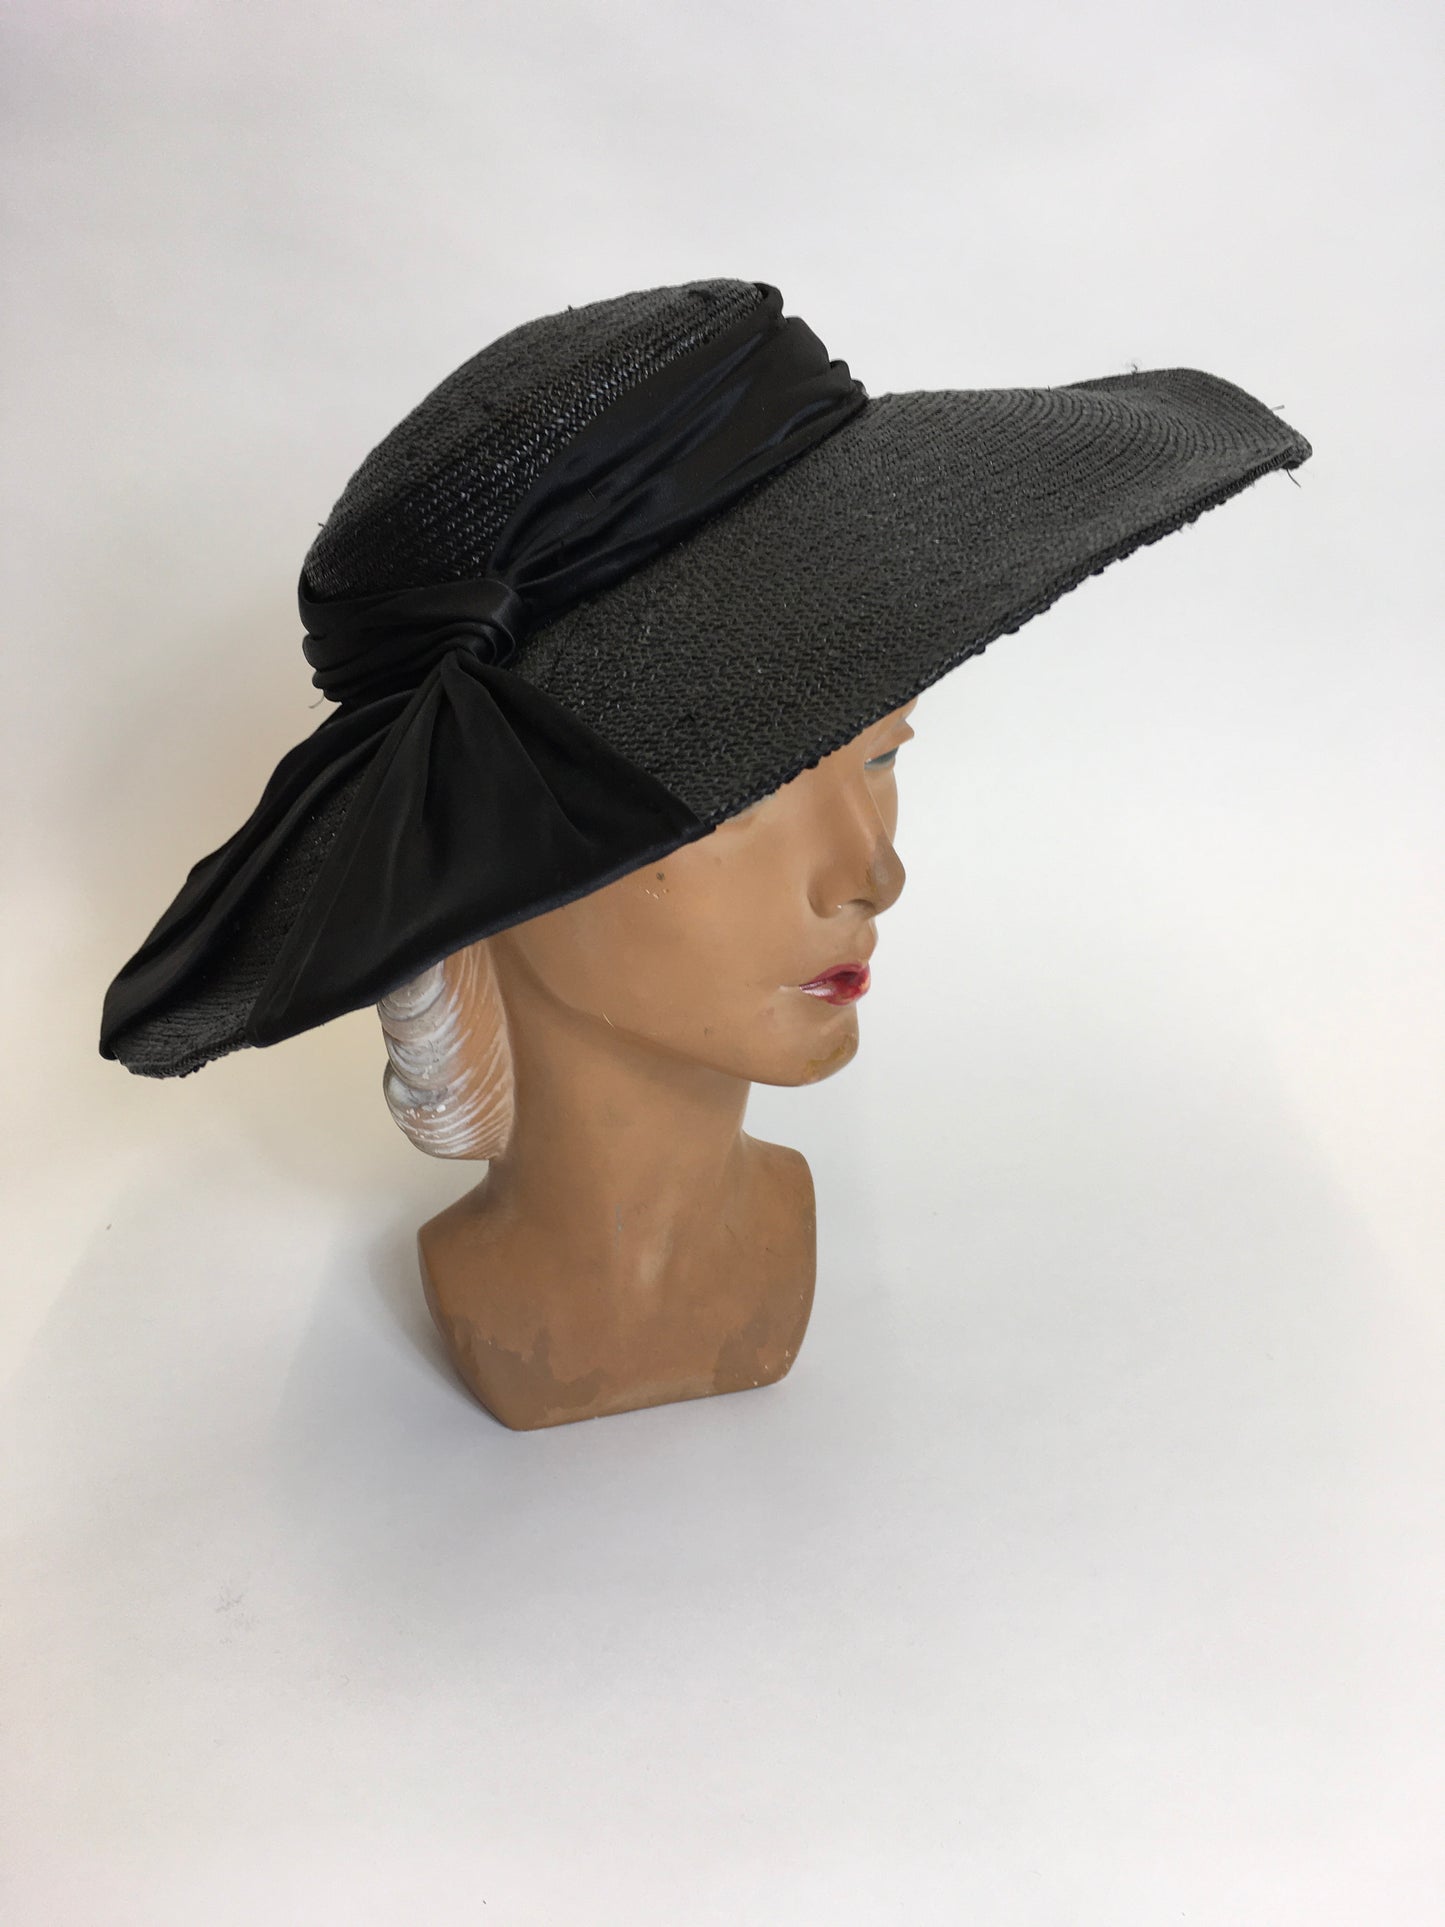 Original 1940’s Black Saucer Hat - ‘ Made In France ‘ With Black Satin Bow Ribboning